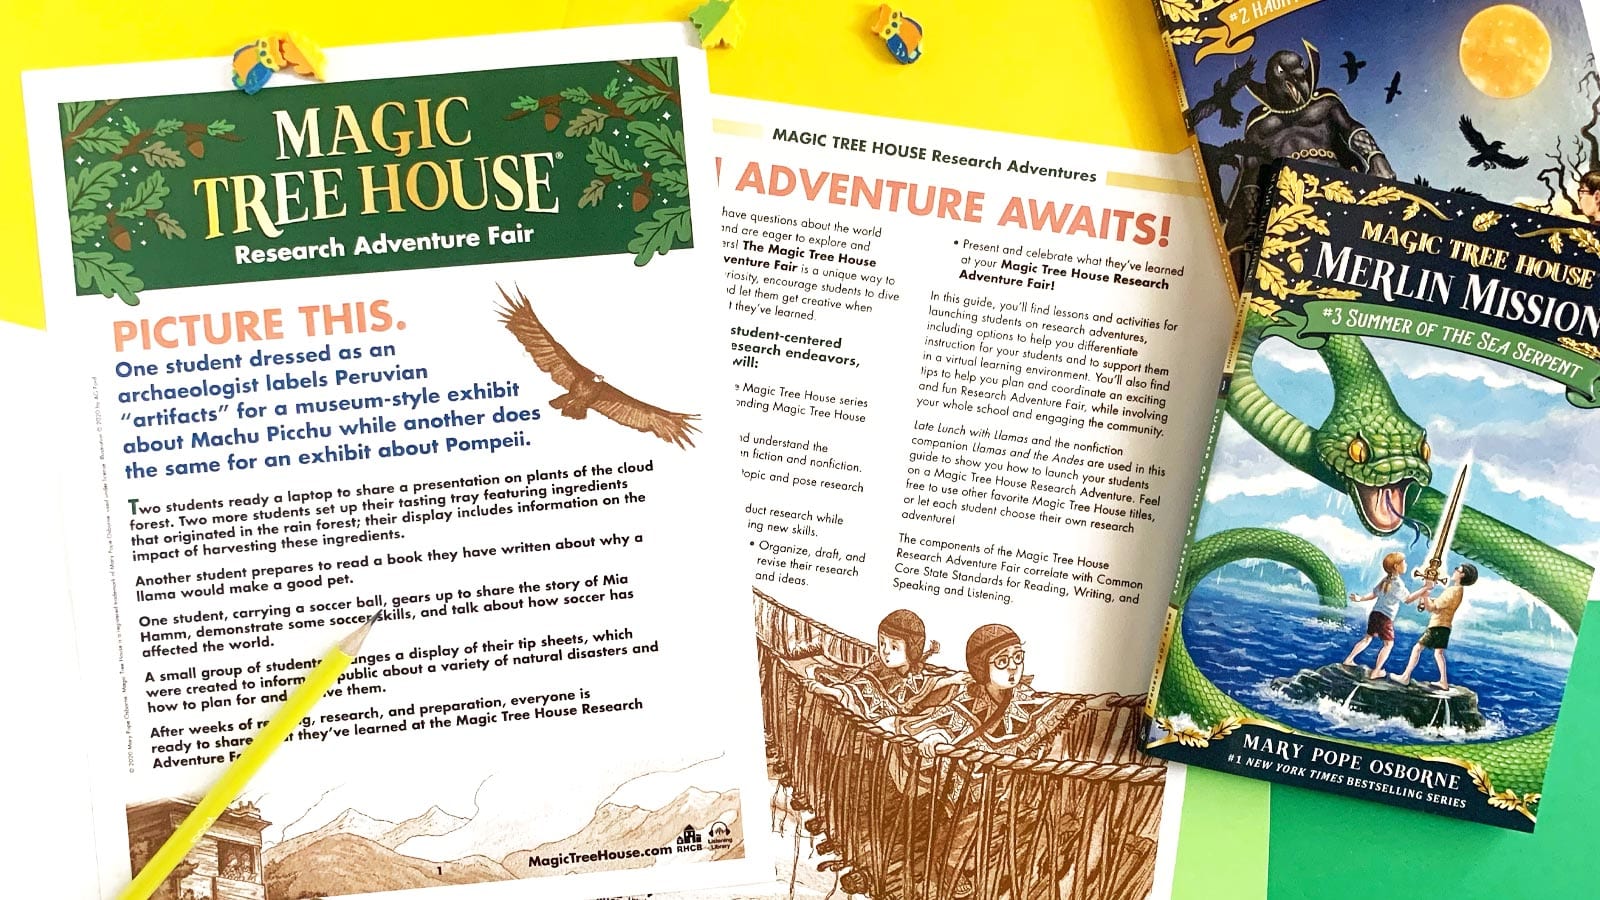 Magic Tree House guide with two books on a colored background.